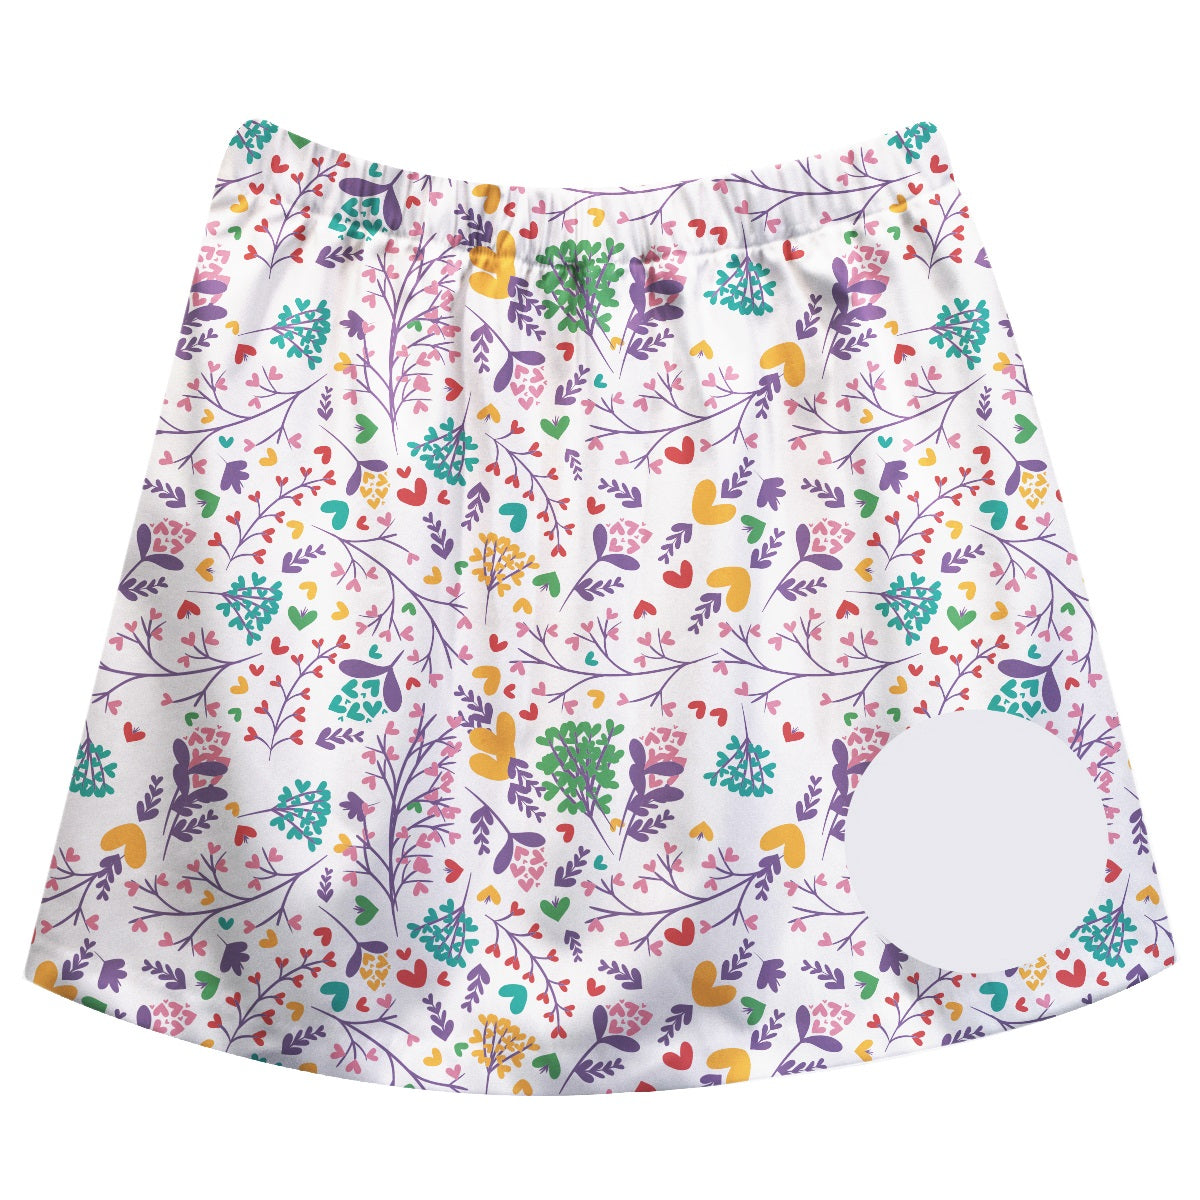 Floral Print Personalized Monogram White Skirt - Wimziy&Co.